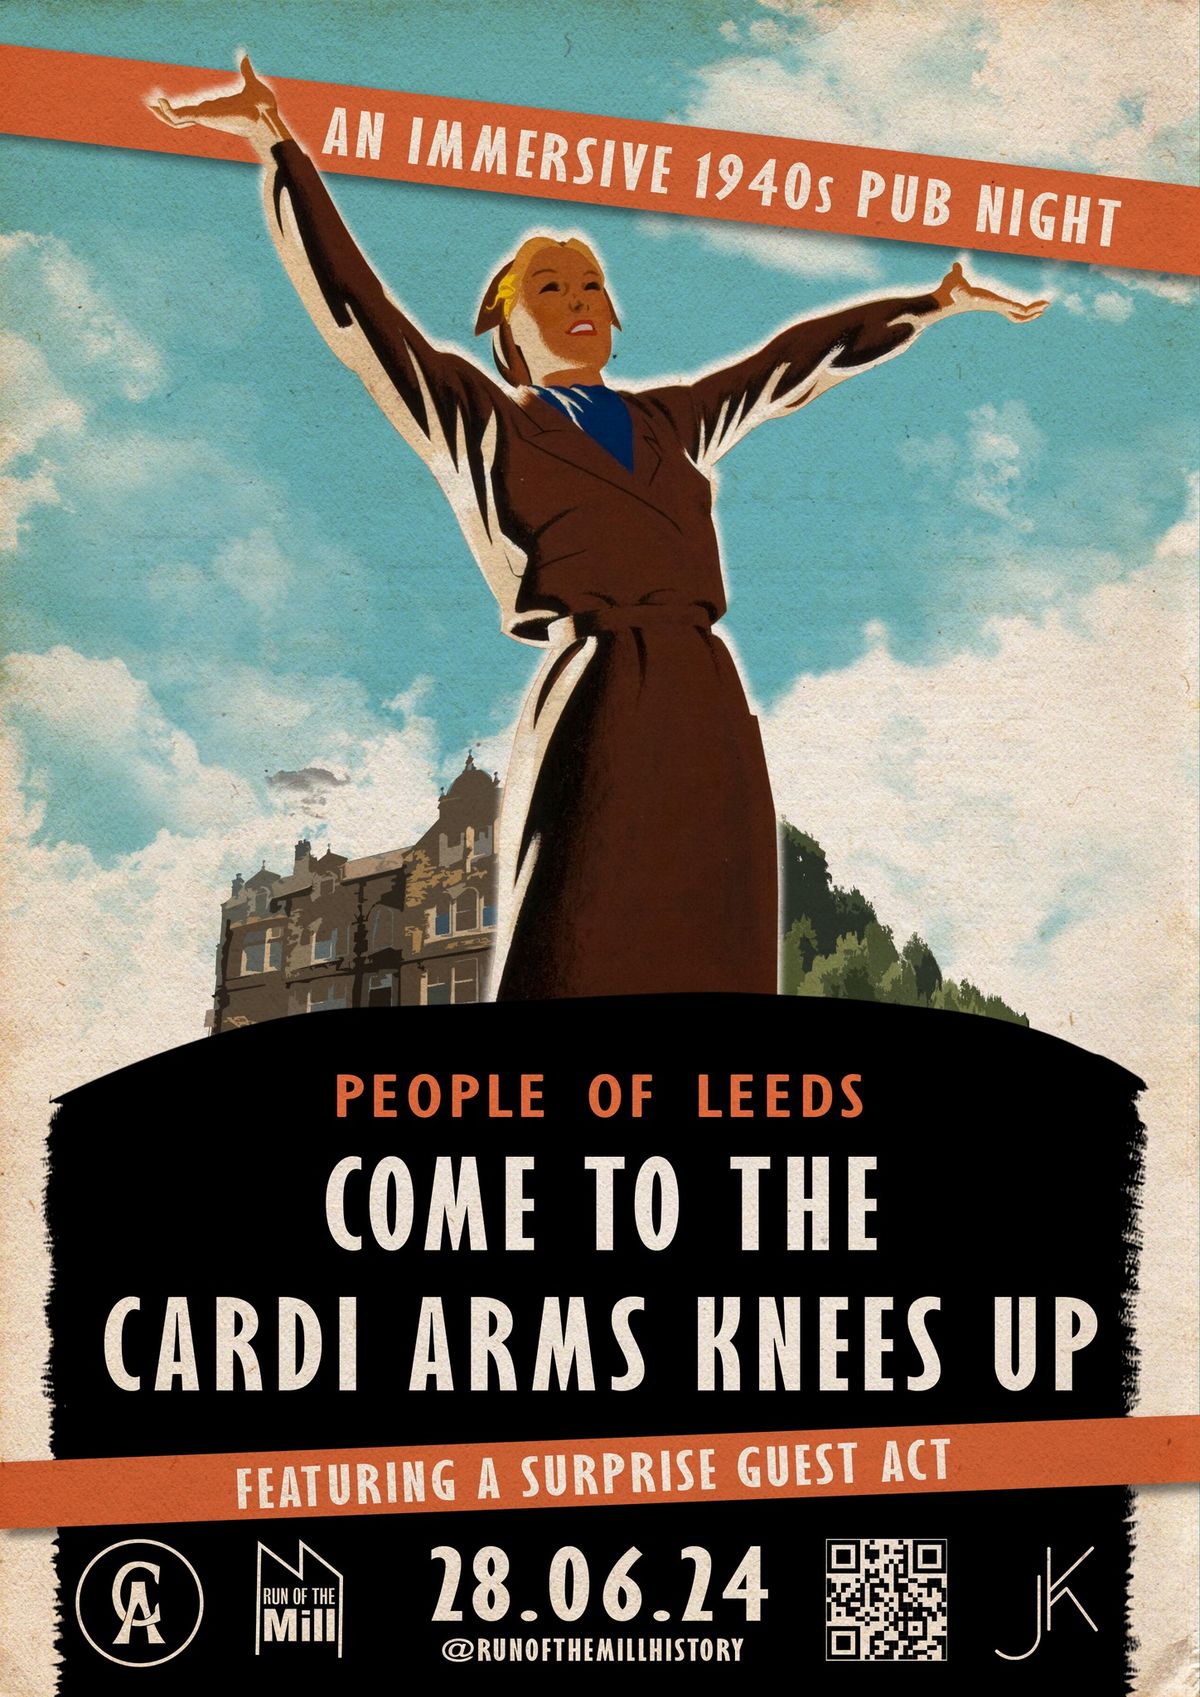 The Cardi Arms Knees Up